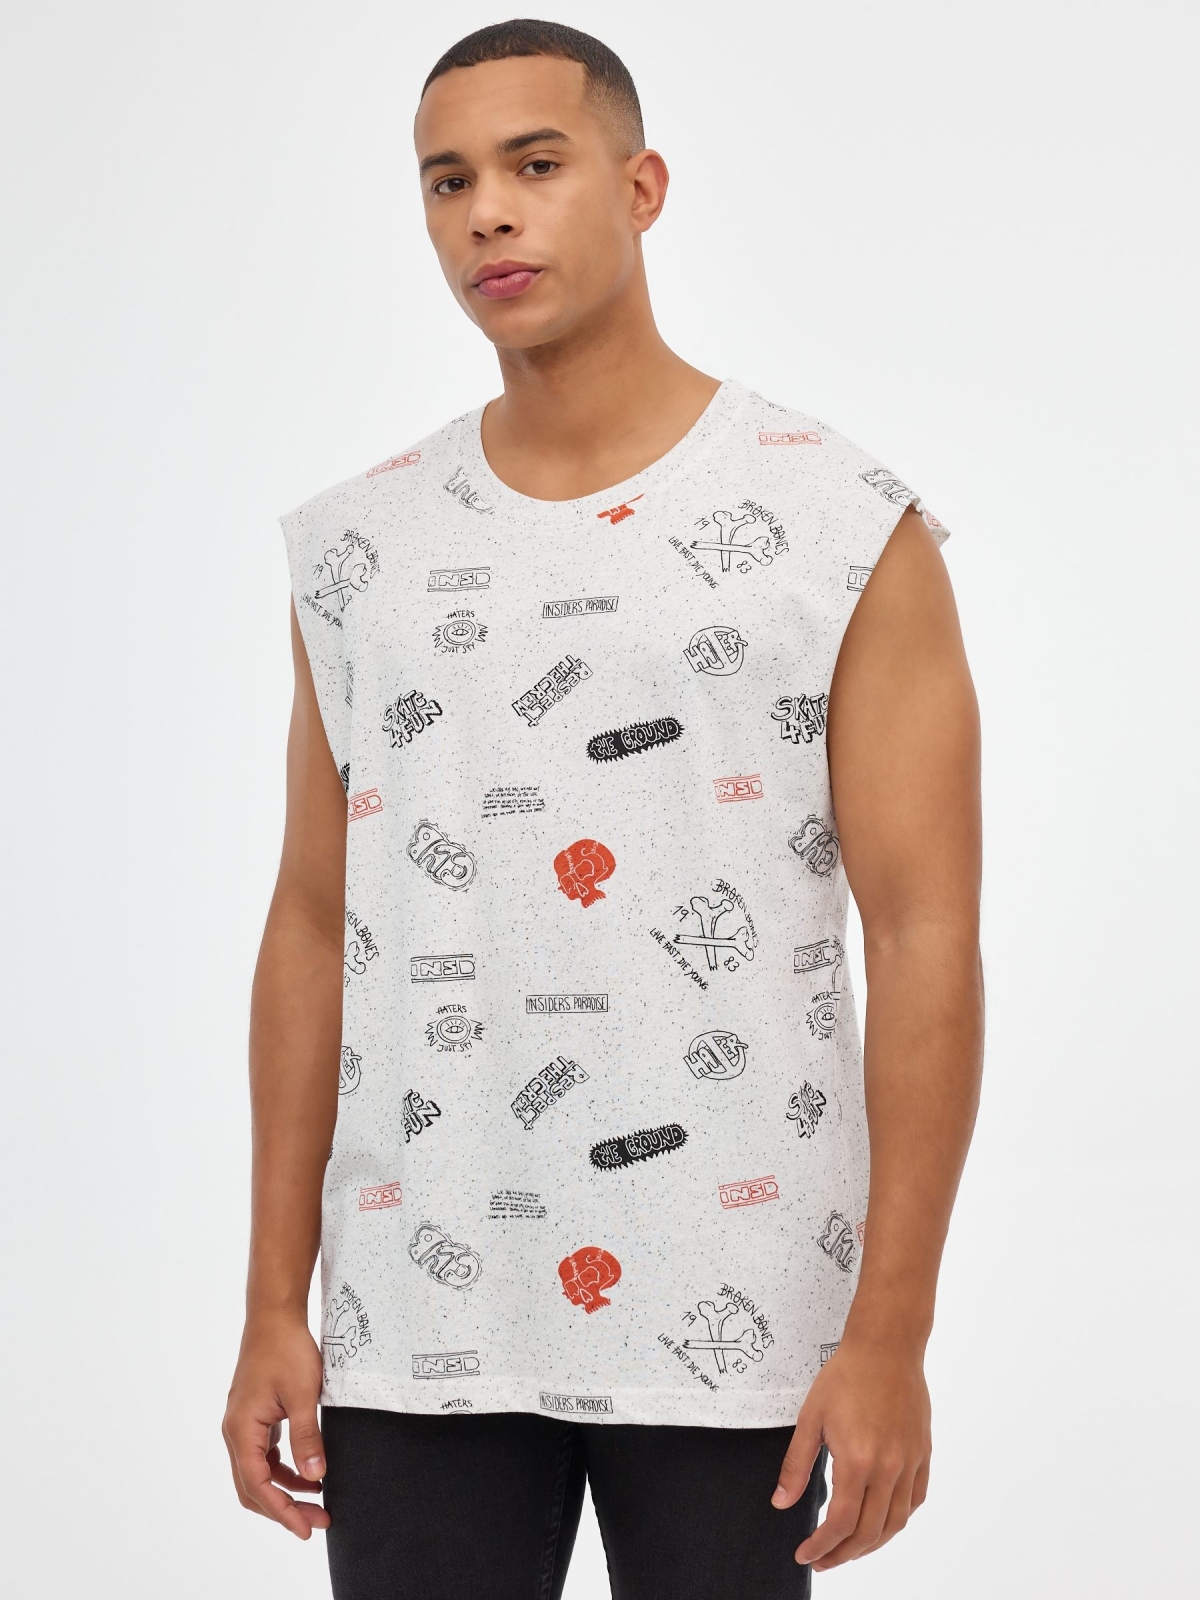 Printed sleeveless t-shirt grey middle front view